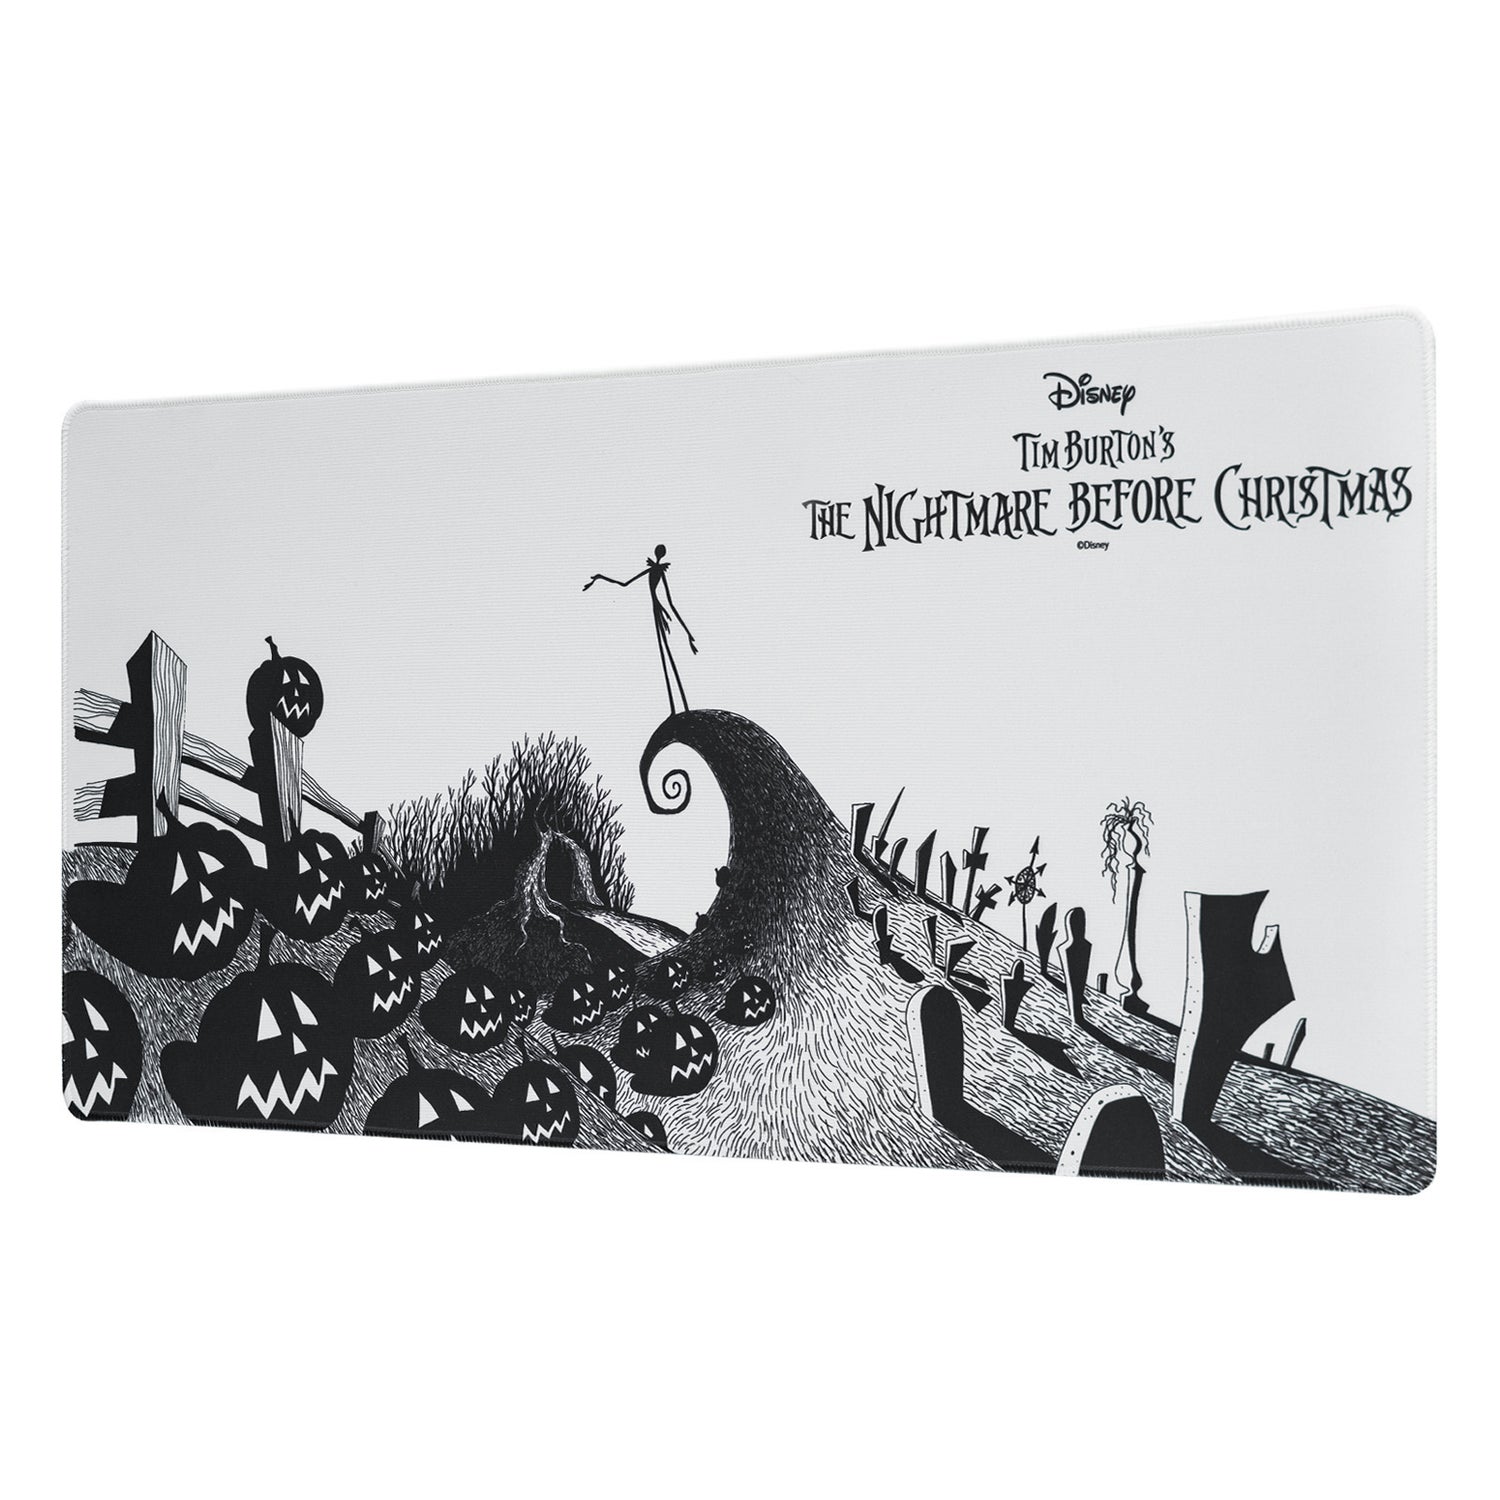 The Nightmare Before Christmas Xl Mouse Pad